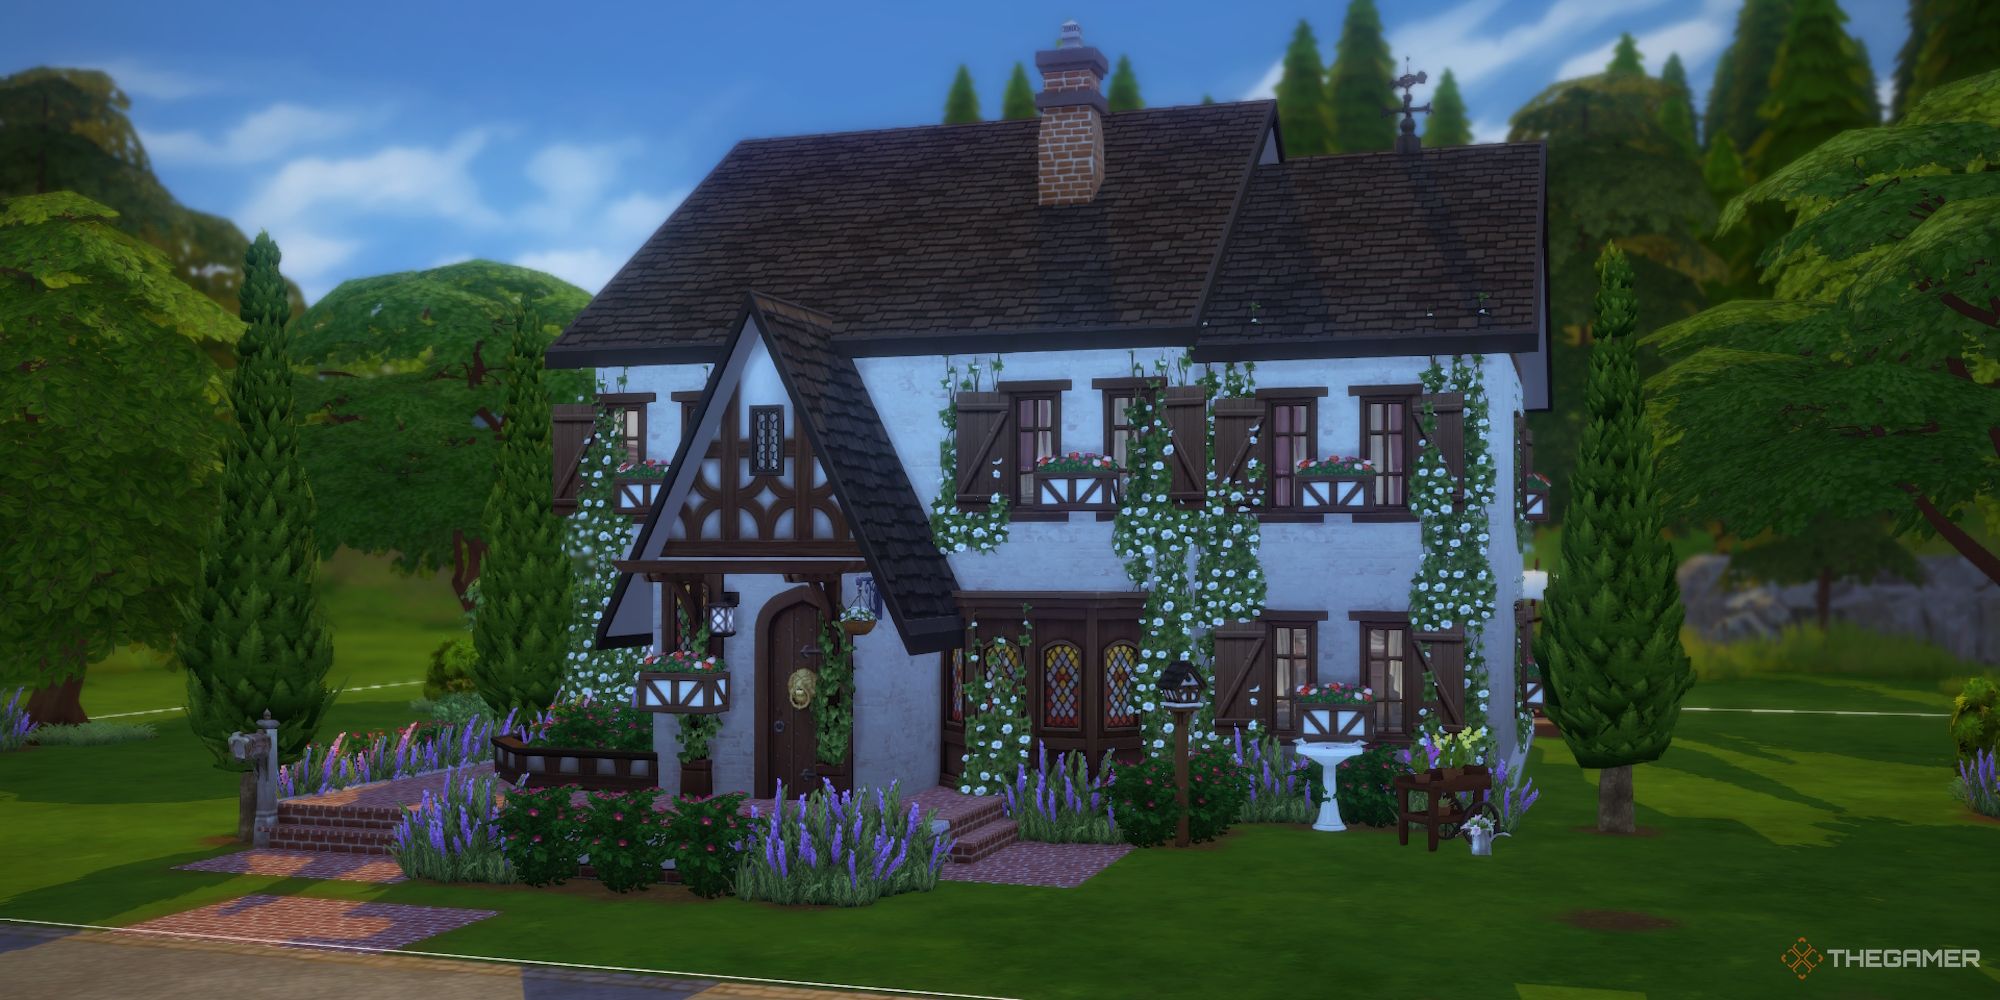 Building a cottage Tudor home in Sims 4 Build Mode